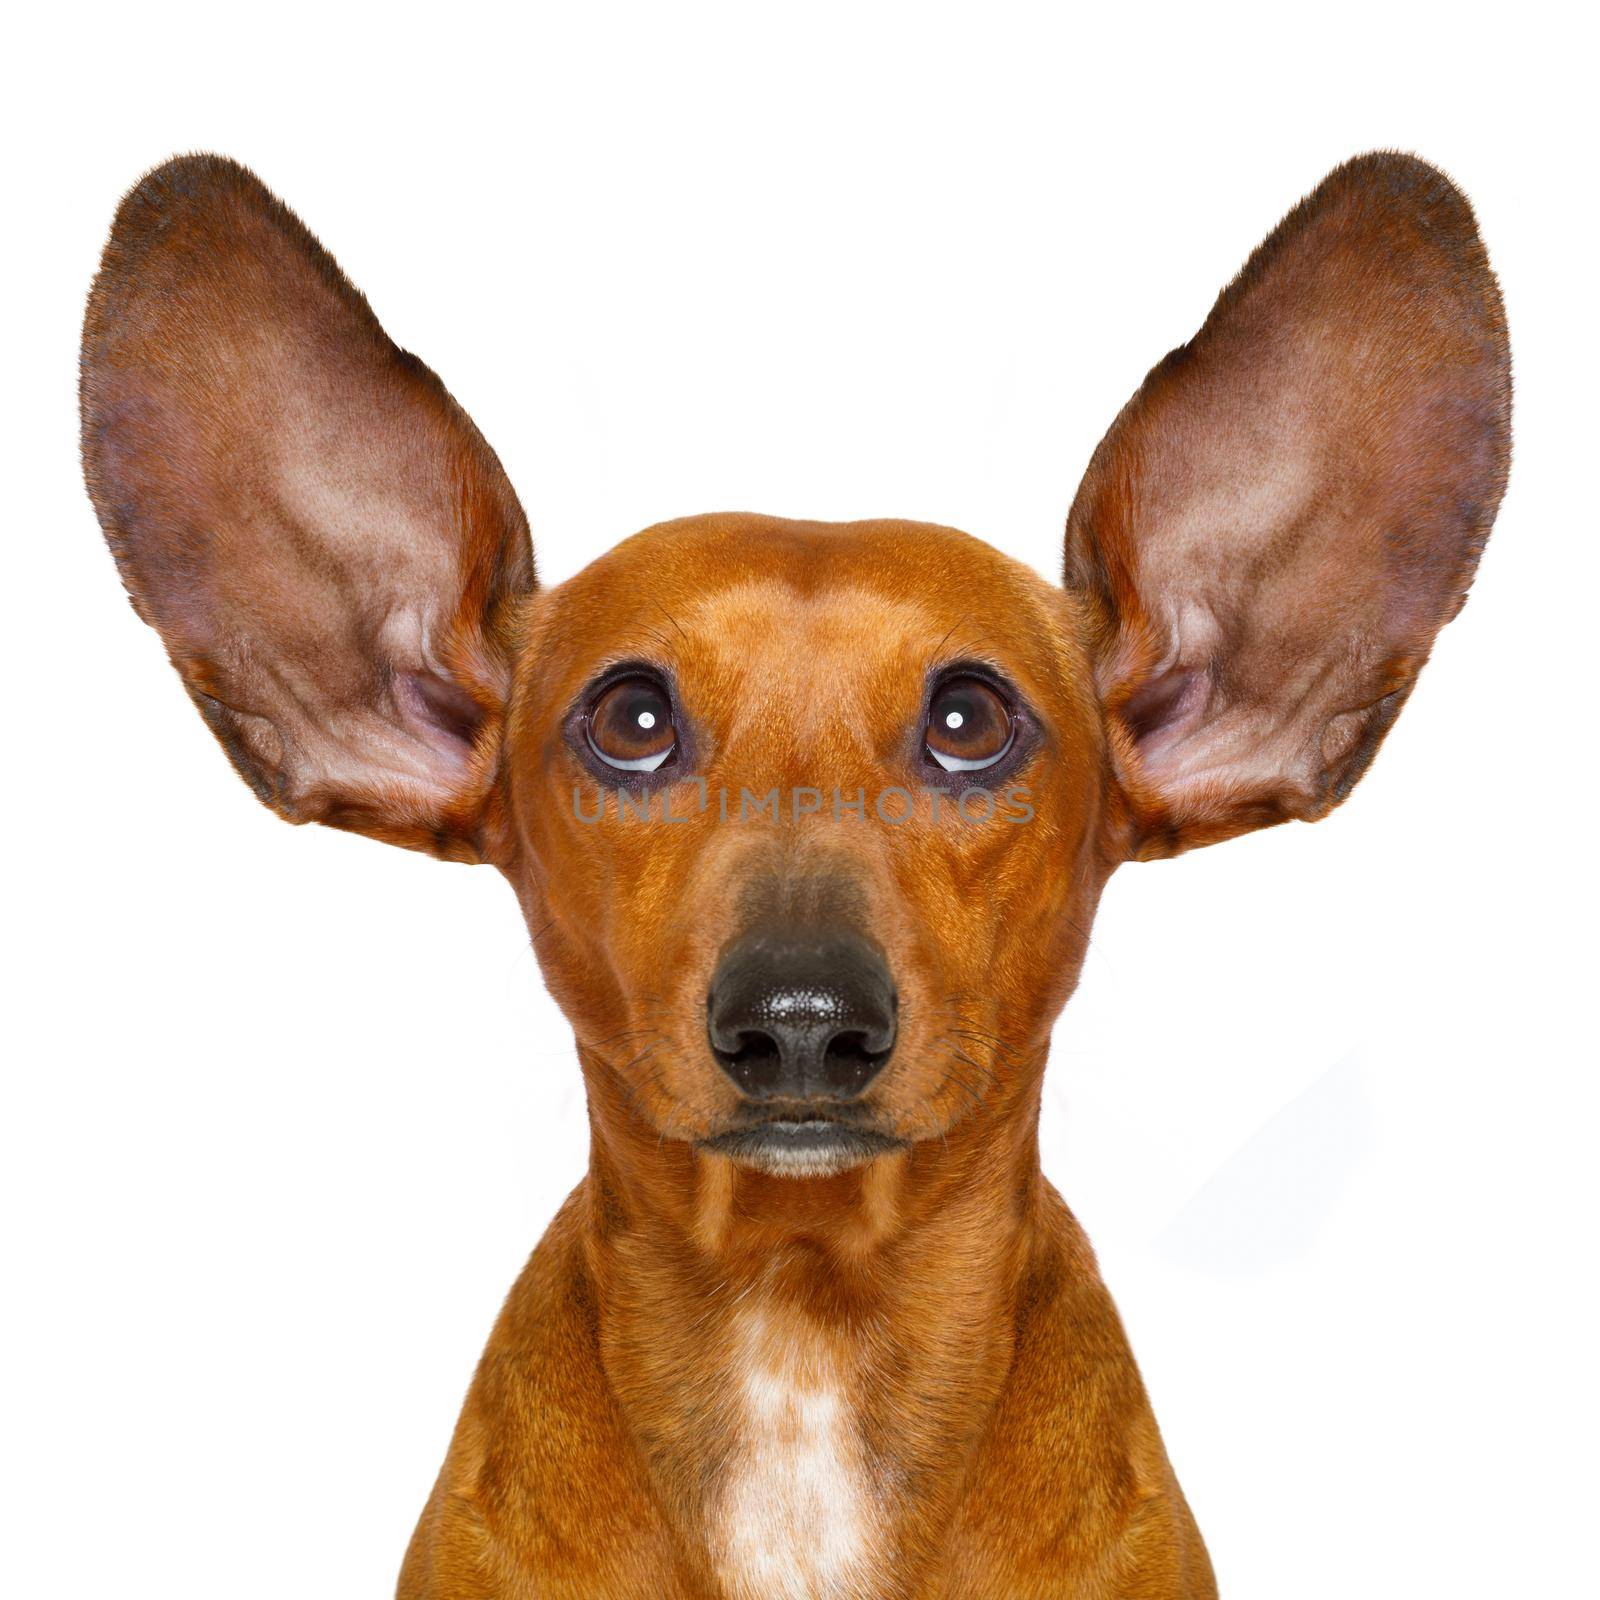 dachshund or  sausage dog listening with both  ears very carefully , isolated on white background